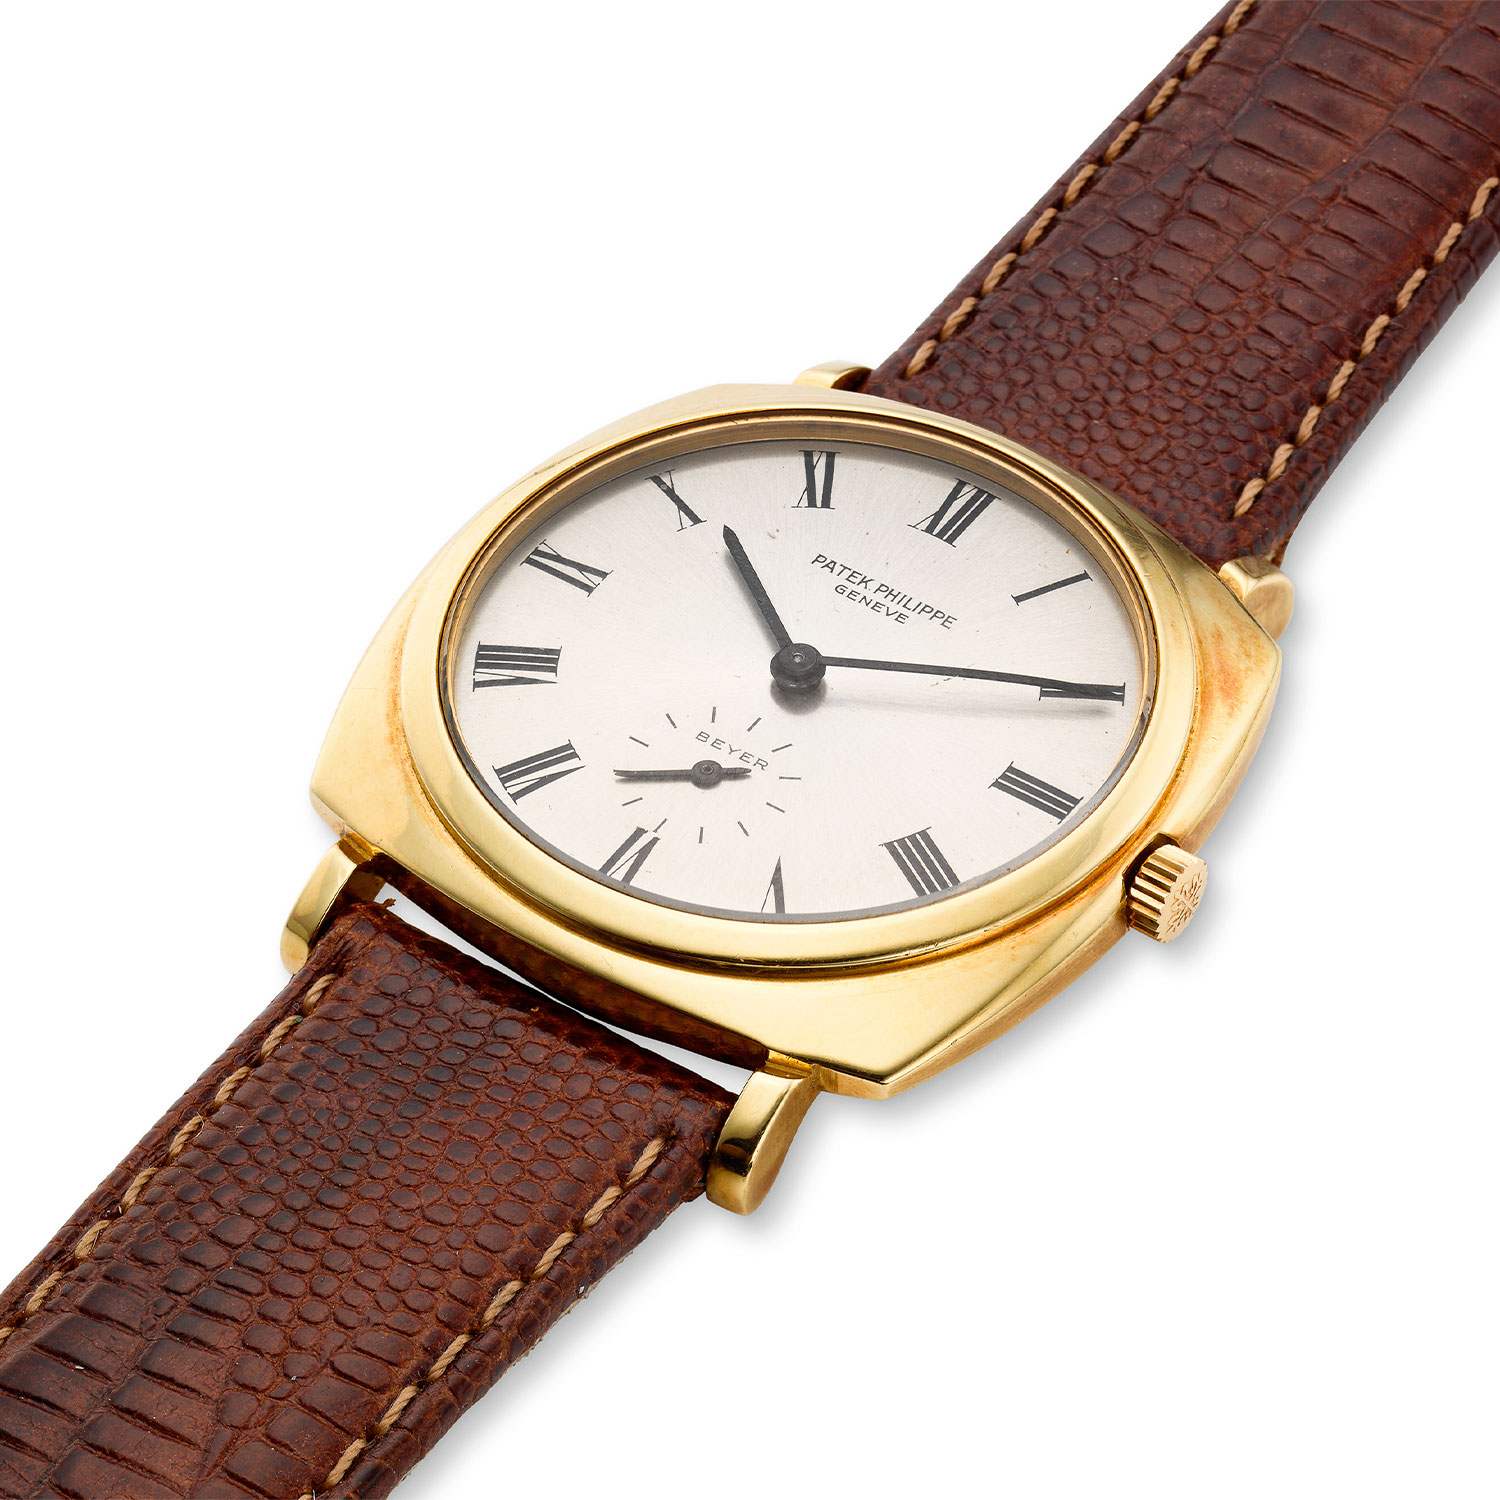 PATEK PHILIPPE YELLOW GOLD REF. 3525J - Collectability